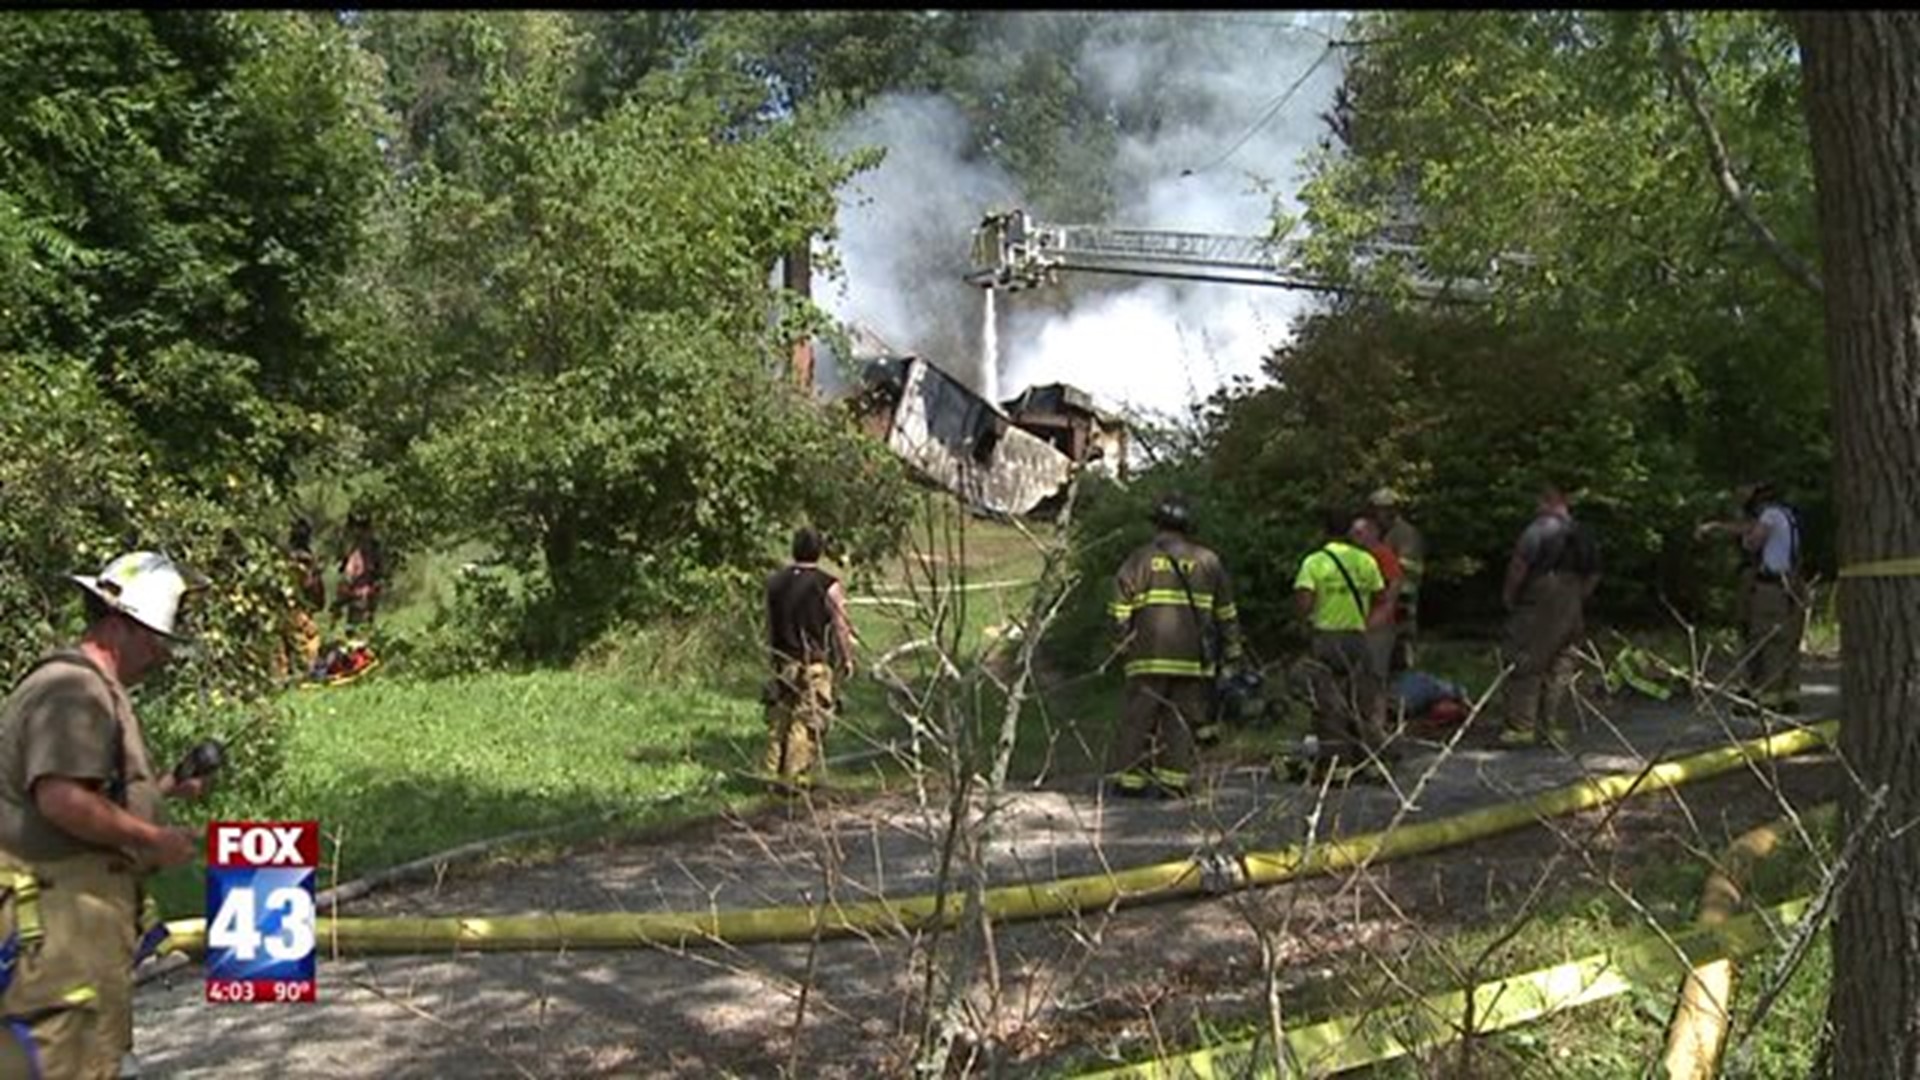 Crews battle house fire in heat and humidity